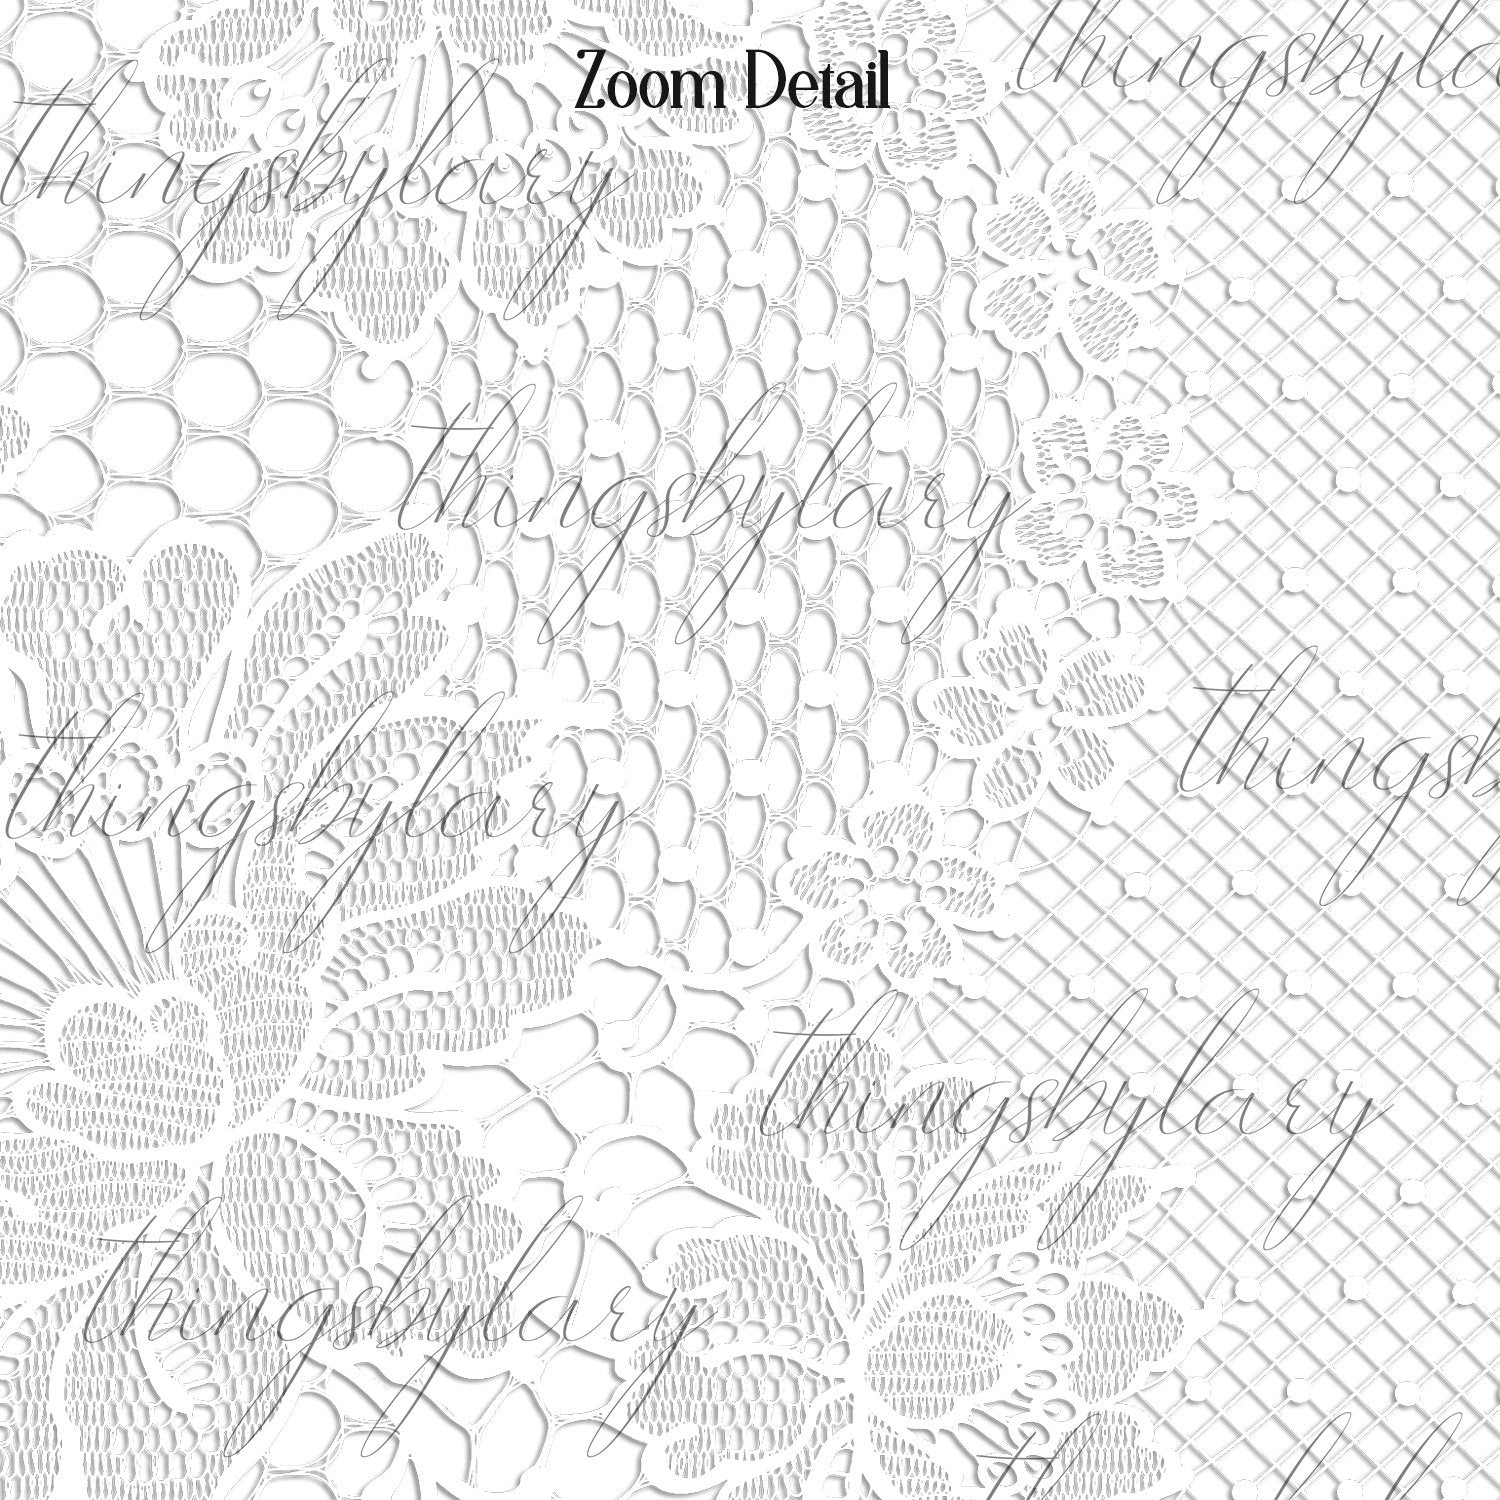 27 White Lace Overlays Borders Frames Images A4 Size PNG Transparent 300 Dpi Instant Download Commercial Use Shabby Wedding Lace Romantic